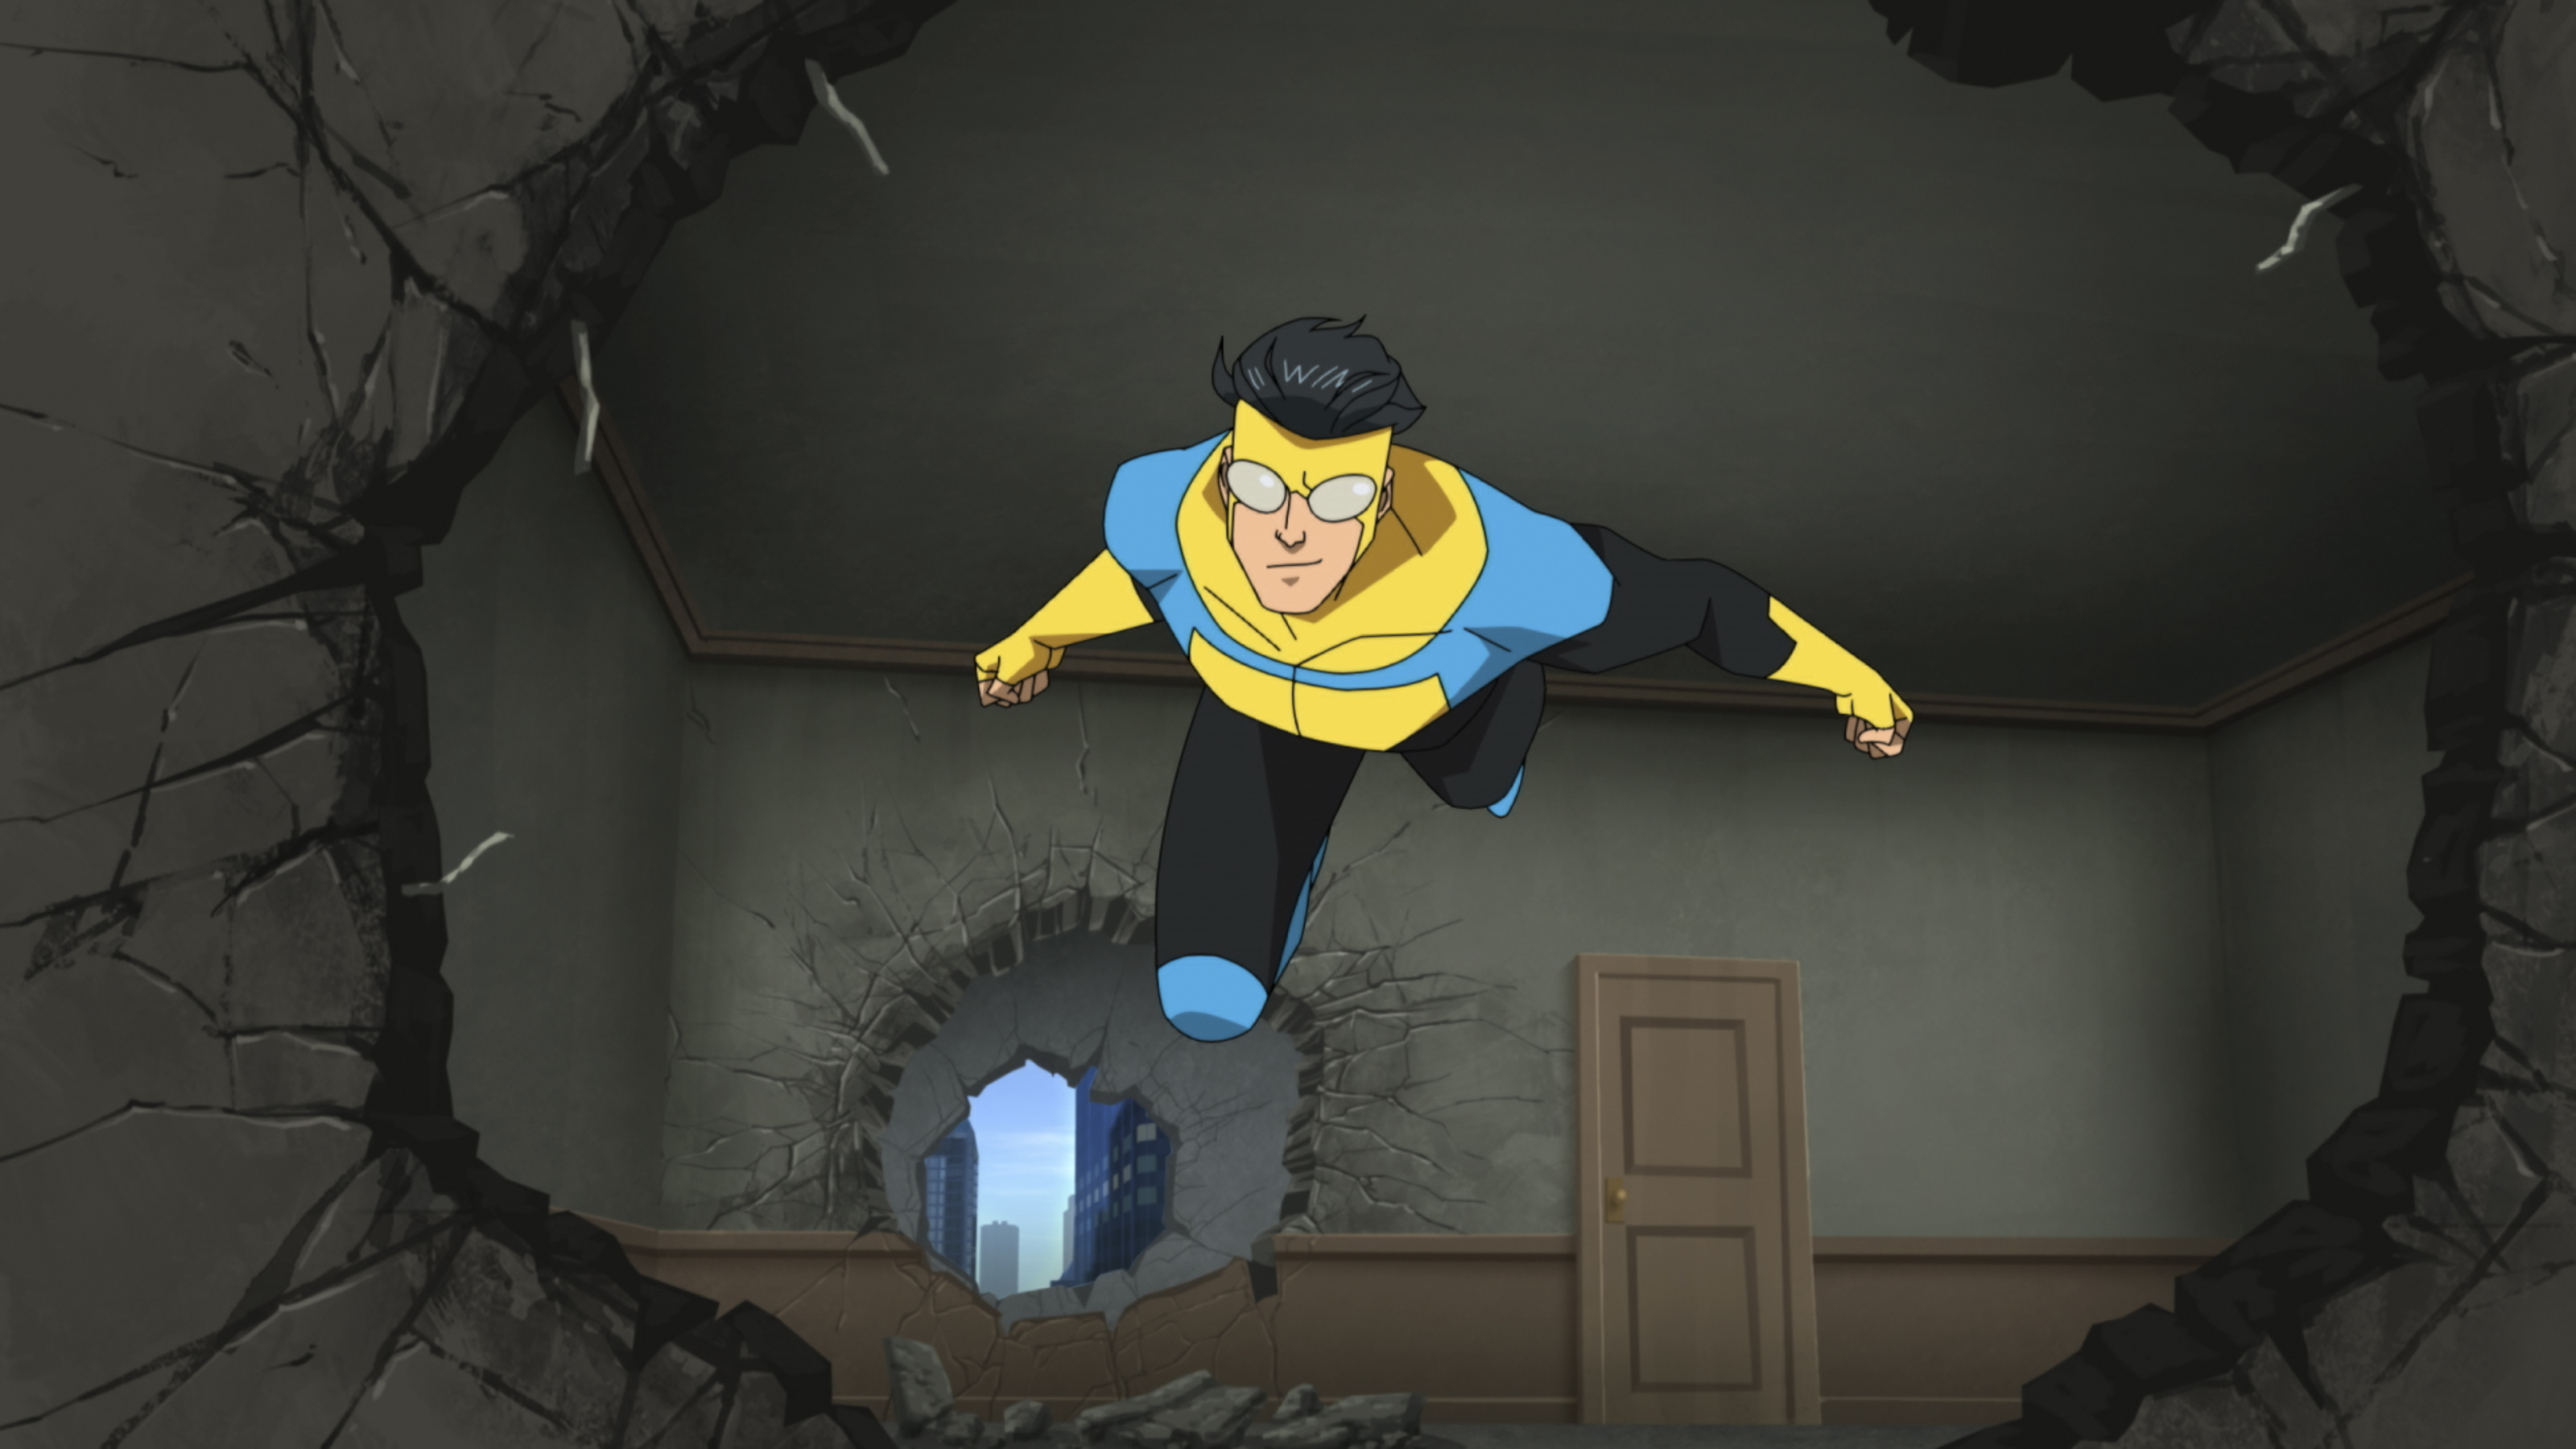 Invincible' Season 1 Summary & Ending, Explained - Too Old and Too Much  Cliched